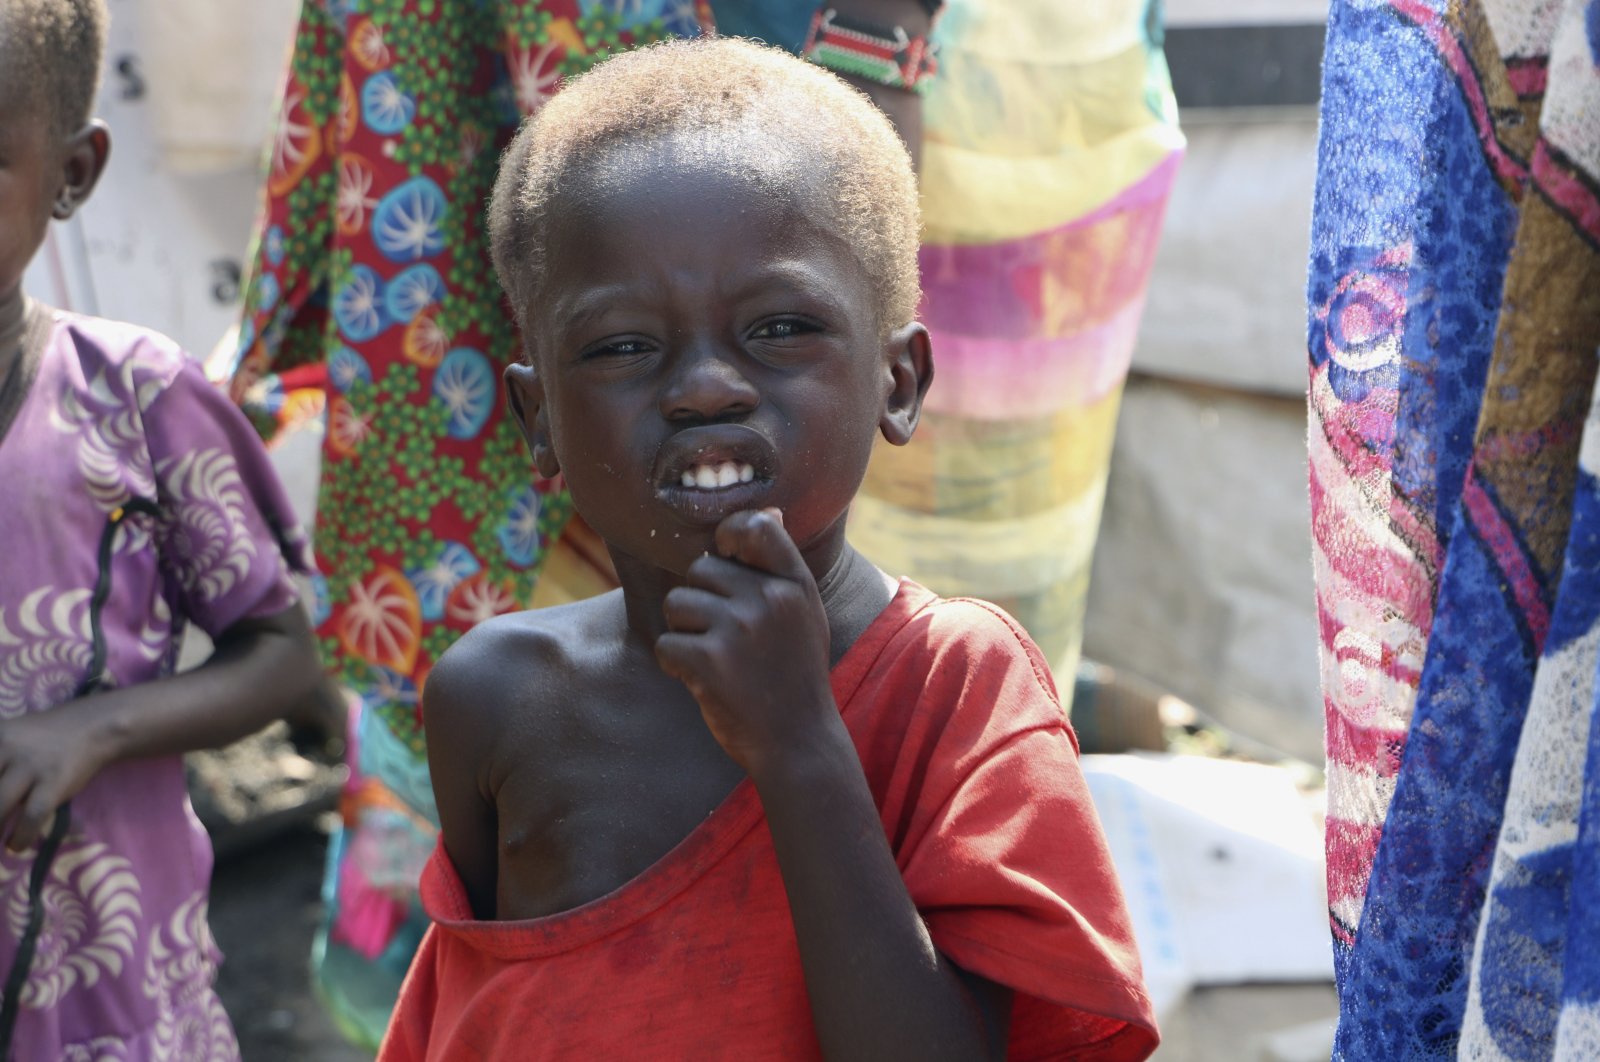 Three-year-old Peter Sebit stands outside a health clinic waiting to receive food supplements in Pibor, South Sudan, Dec. 17, 2020. (AP Photo)